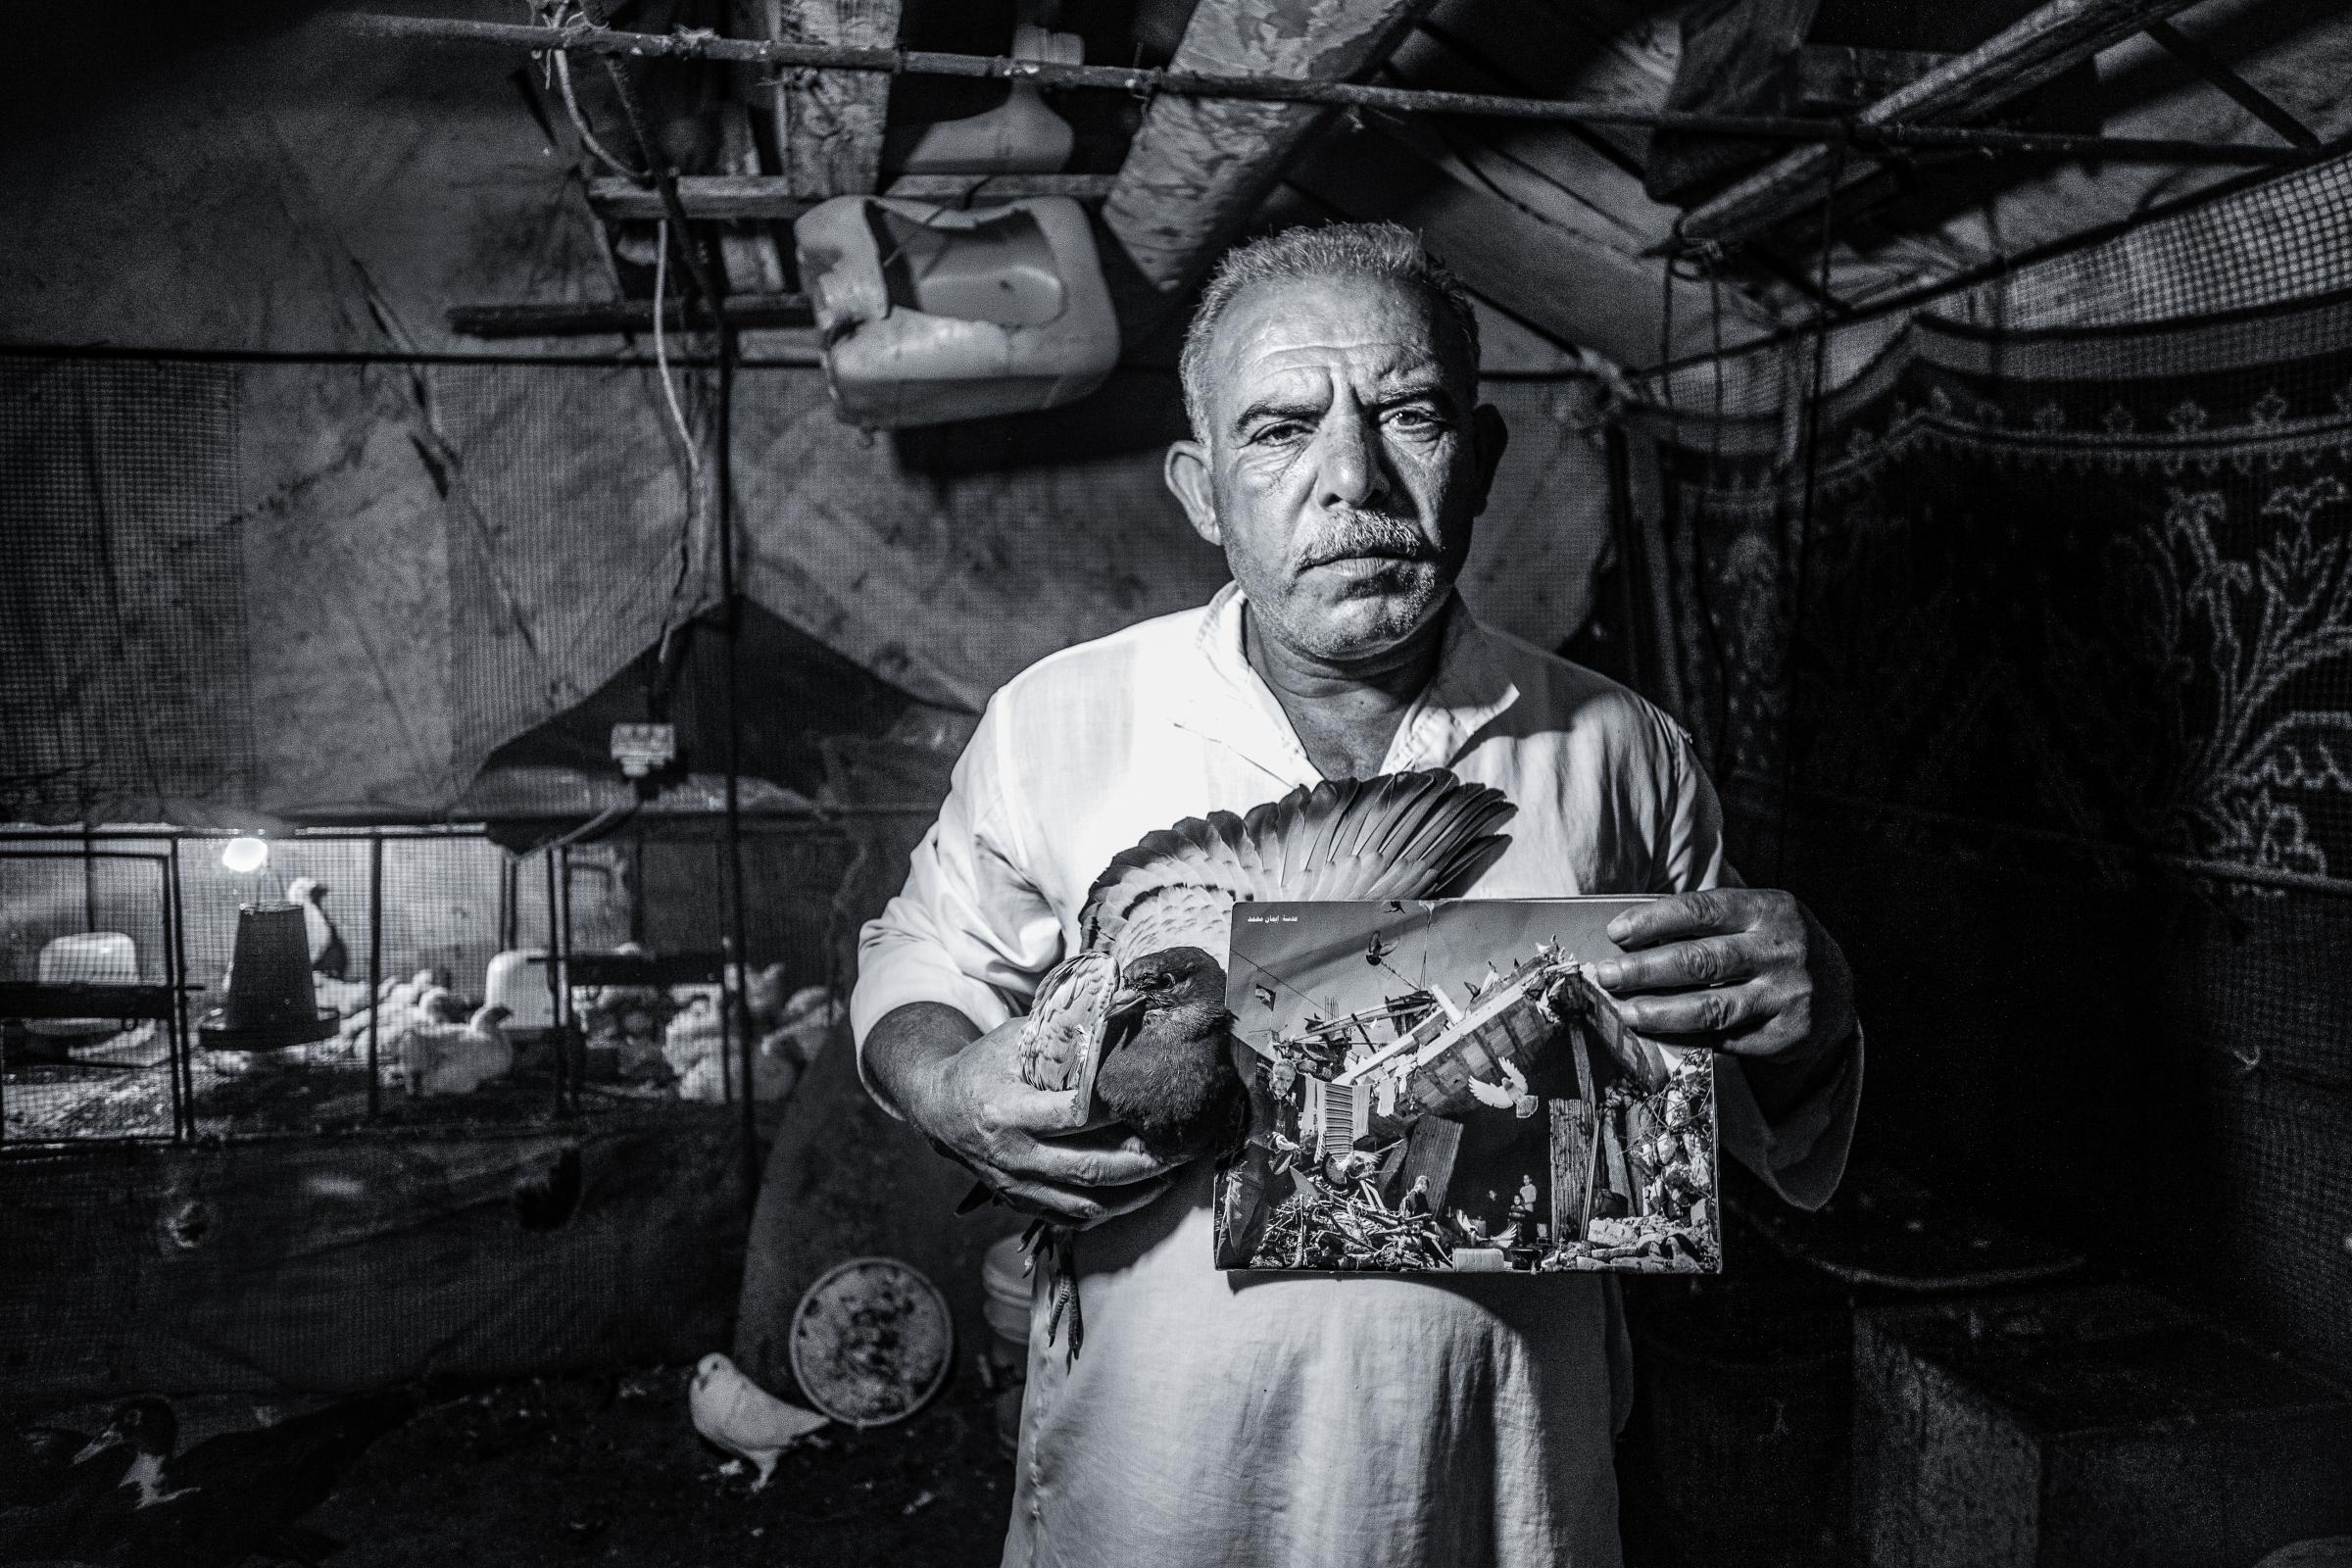 Broken souvenirs -  Mohammed Khader, Gaza 2008:  "They took all...